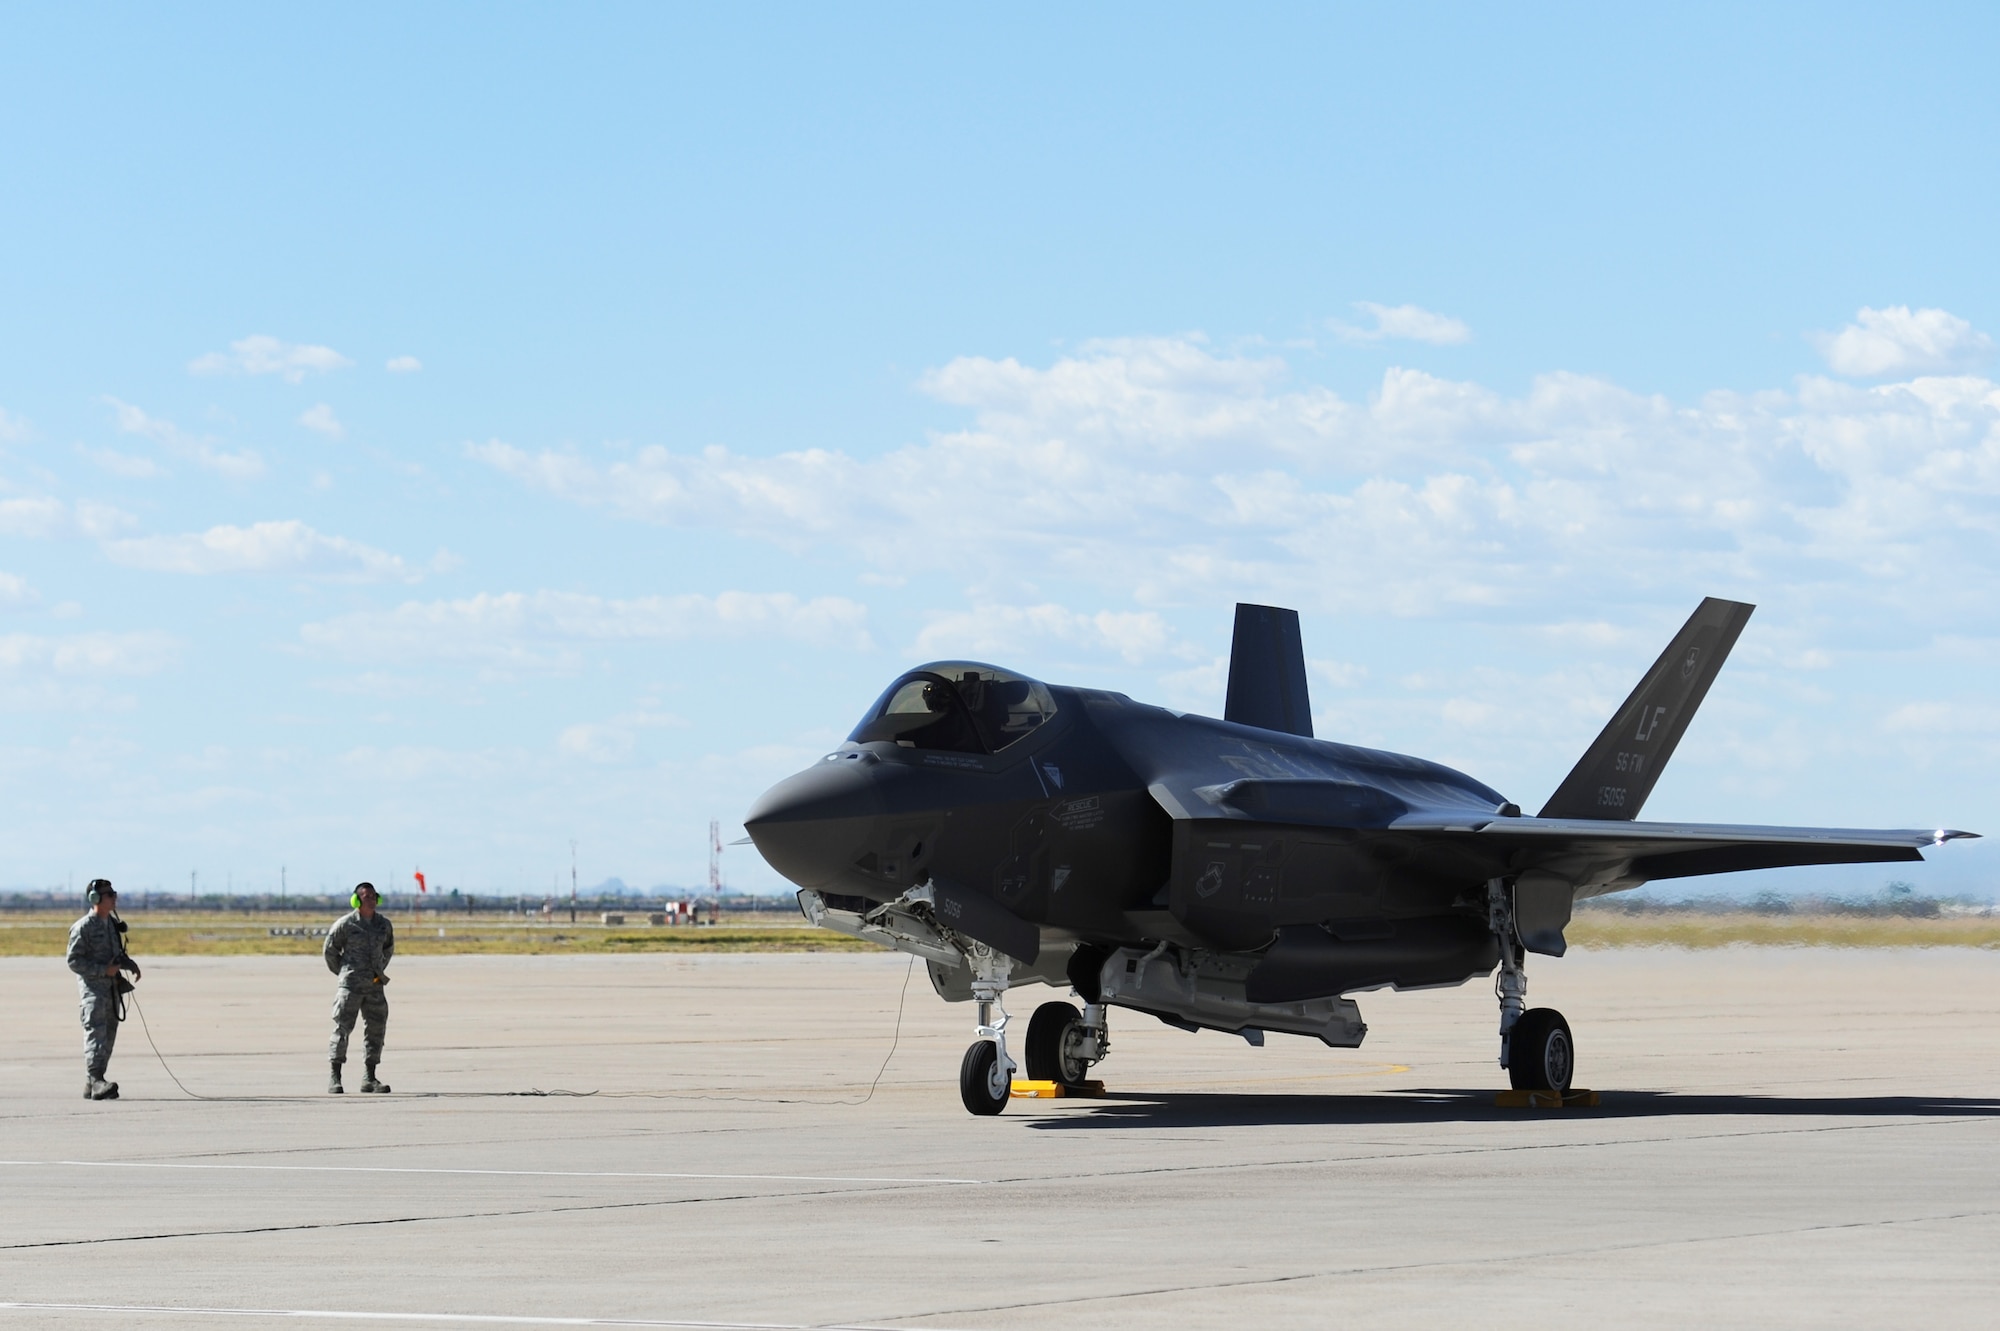 Brig. Gen. Scott Pleus, the 56th Fighter Wing commander, lands the flagship F-35 Lightning ll at Luke Air Force Base, Ariz., April 28, 2015. The flagship's arrival coincides with the start of Luke’s F-35 student pilot training, which begins in May. Luke now has 20 U.S. F-35s and two from the Royal Australian Air Force. (U.S. Air Force photo/Senior Airman Devante Williams)